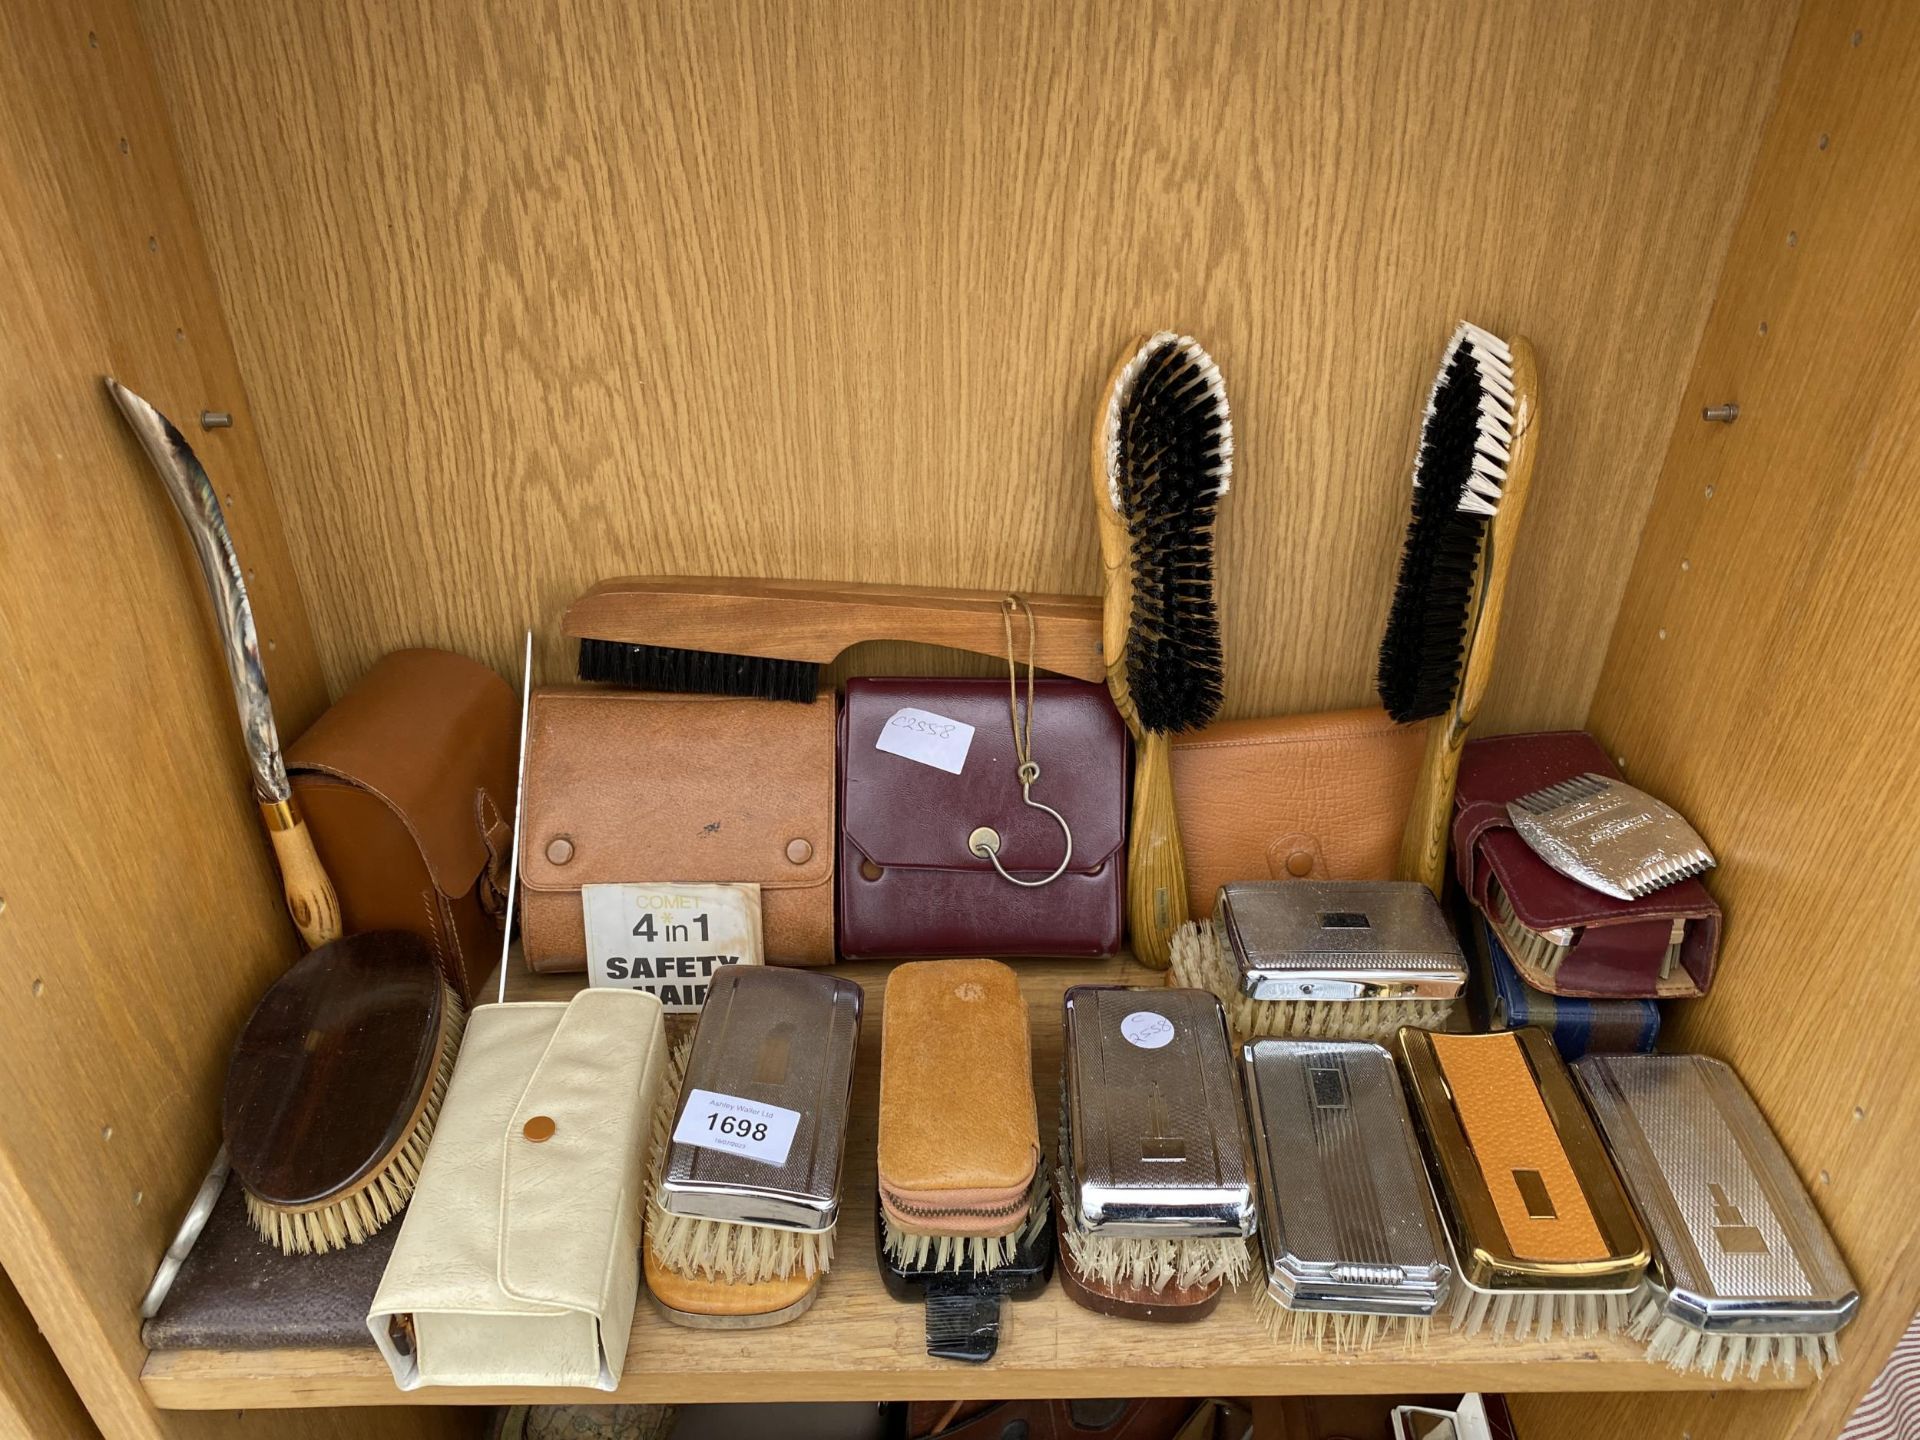 AN ASSORTMENT OF GENTS GROOMING ITEMS TO INCLUDE BRUSHES ETC